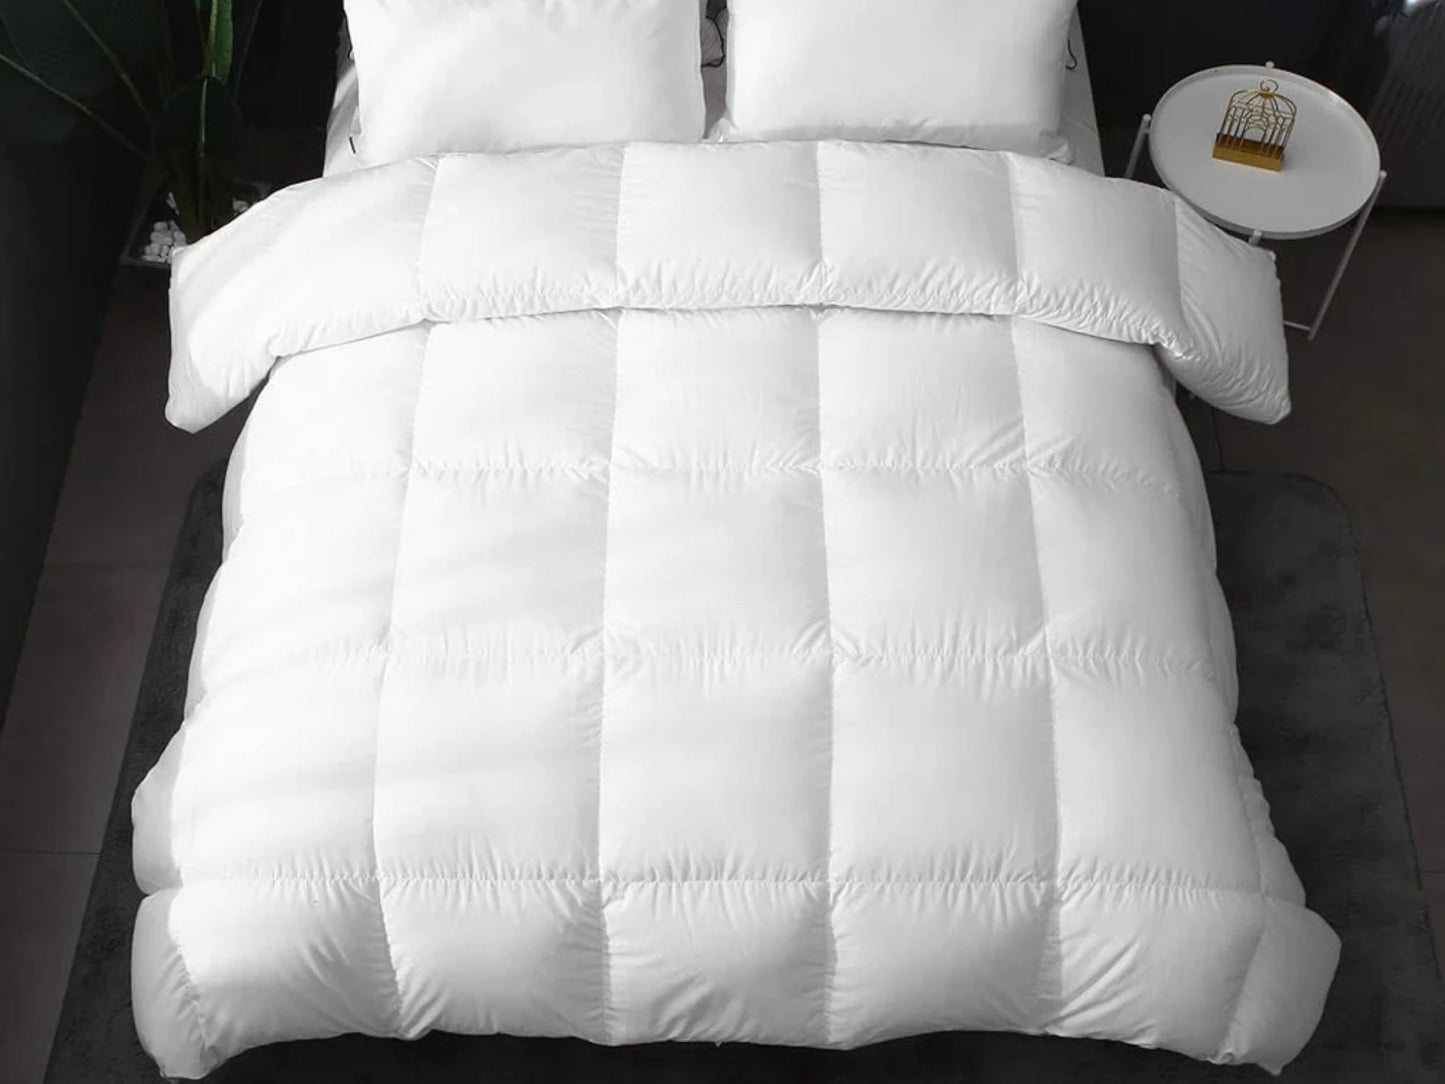 Luxury Duck Feather & Down Natural Duvet 13.5 and 10.5 Tog